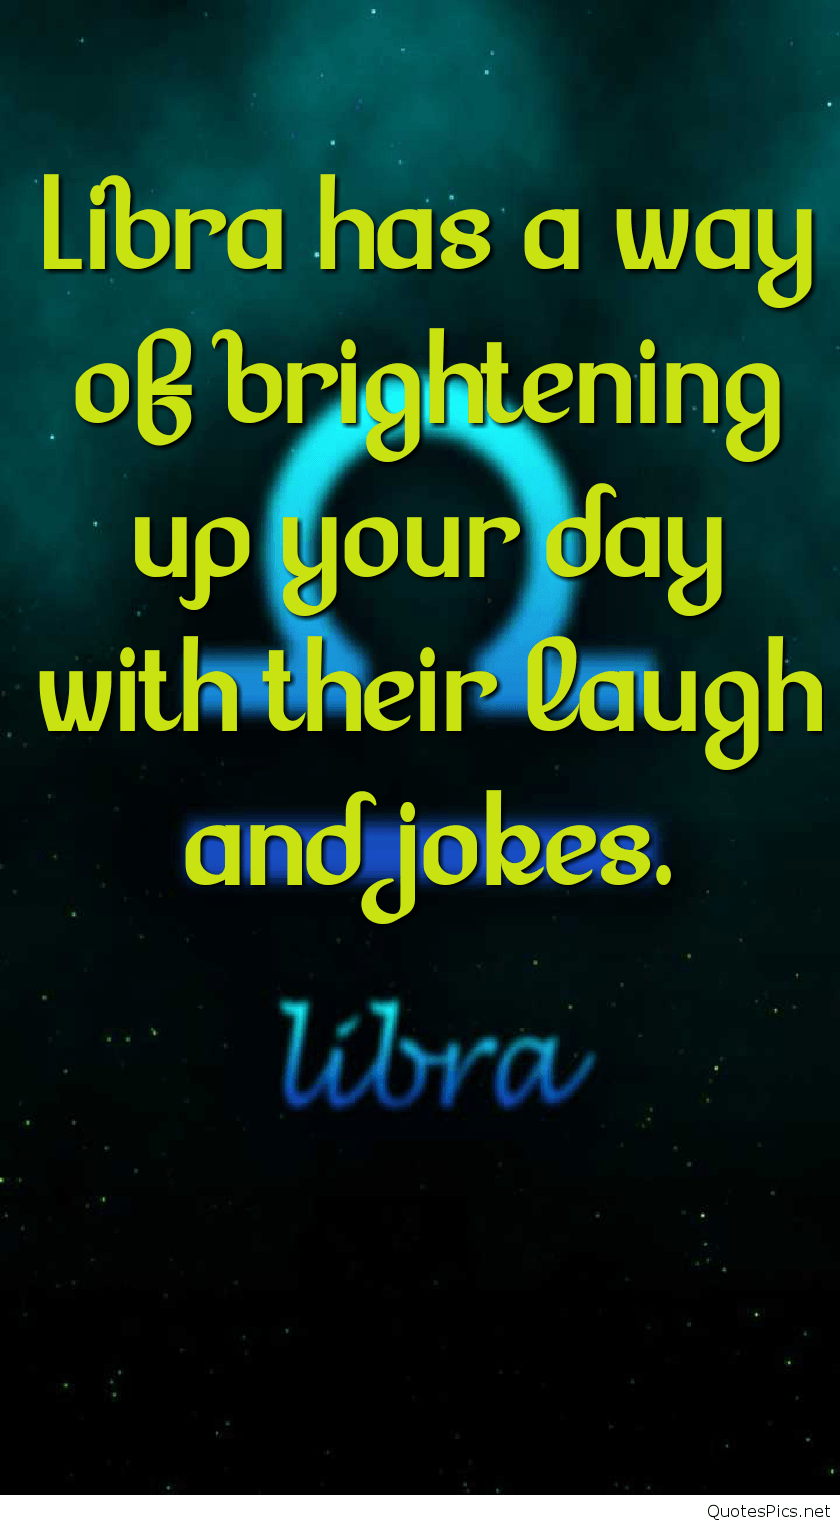 Best Libra Quotes, Image and Libra Zodiac Facts